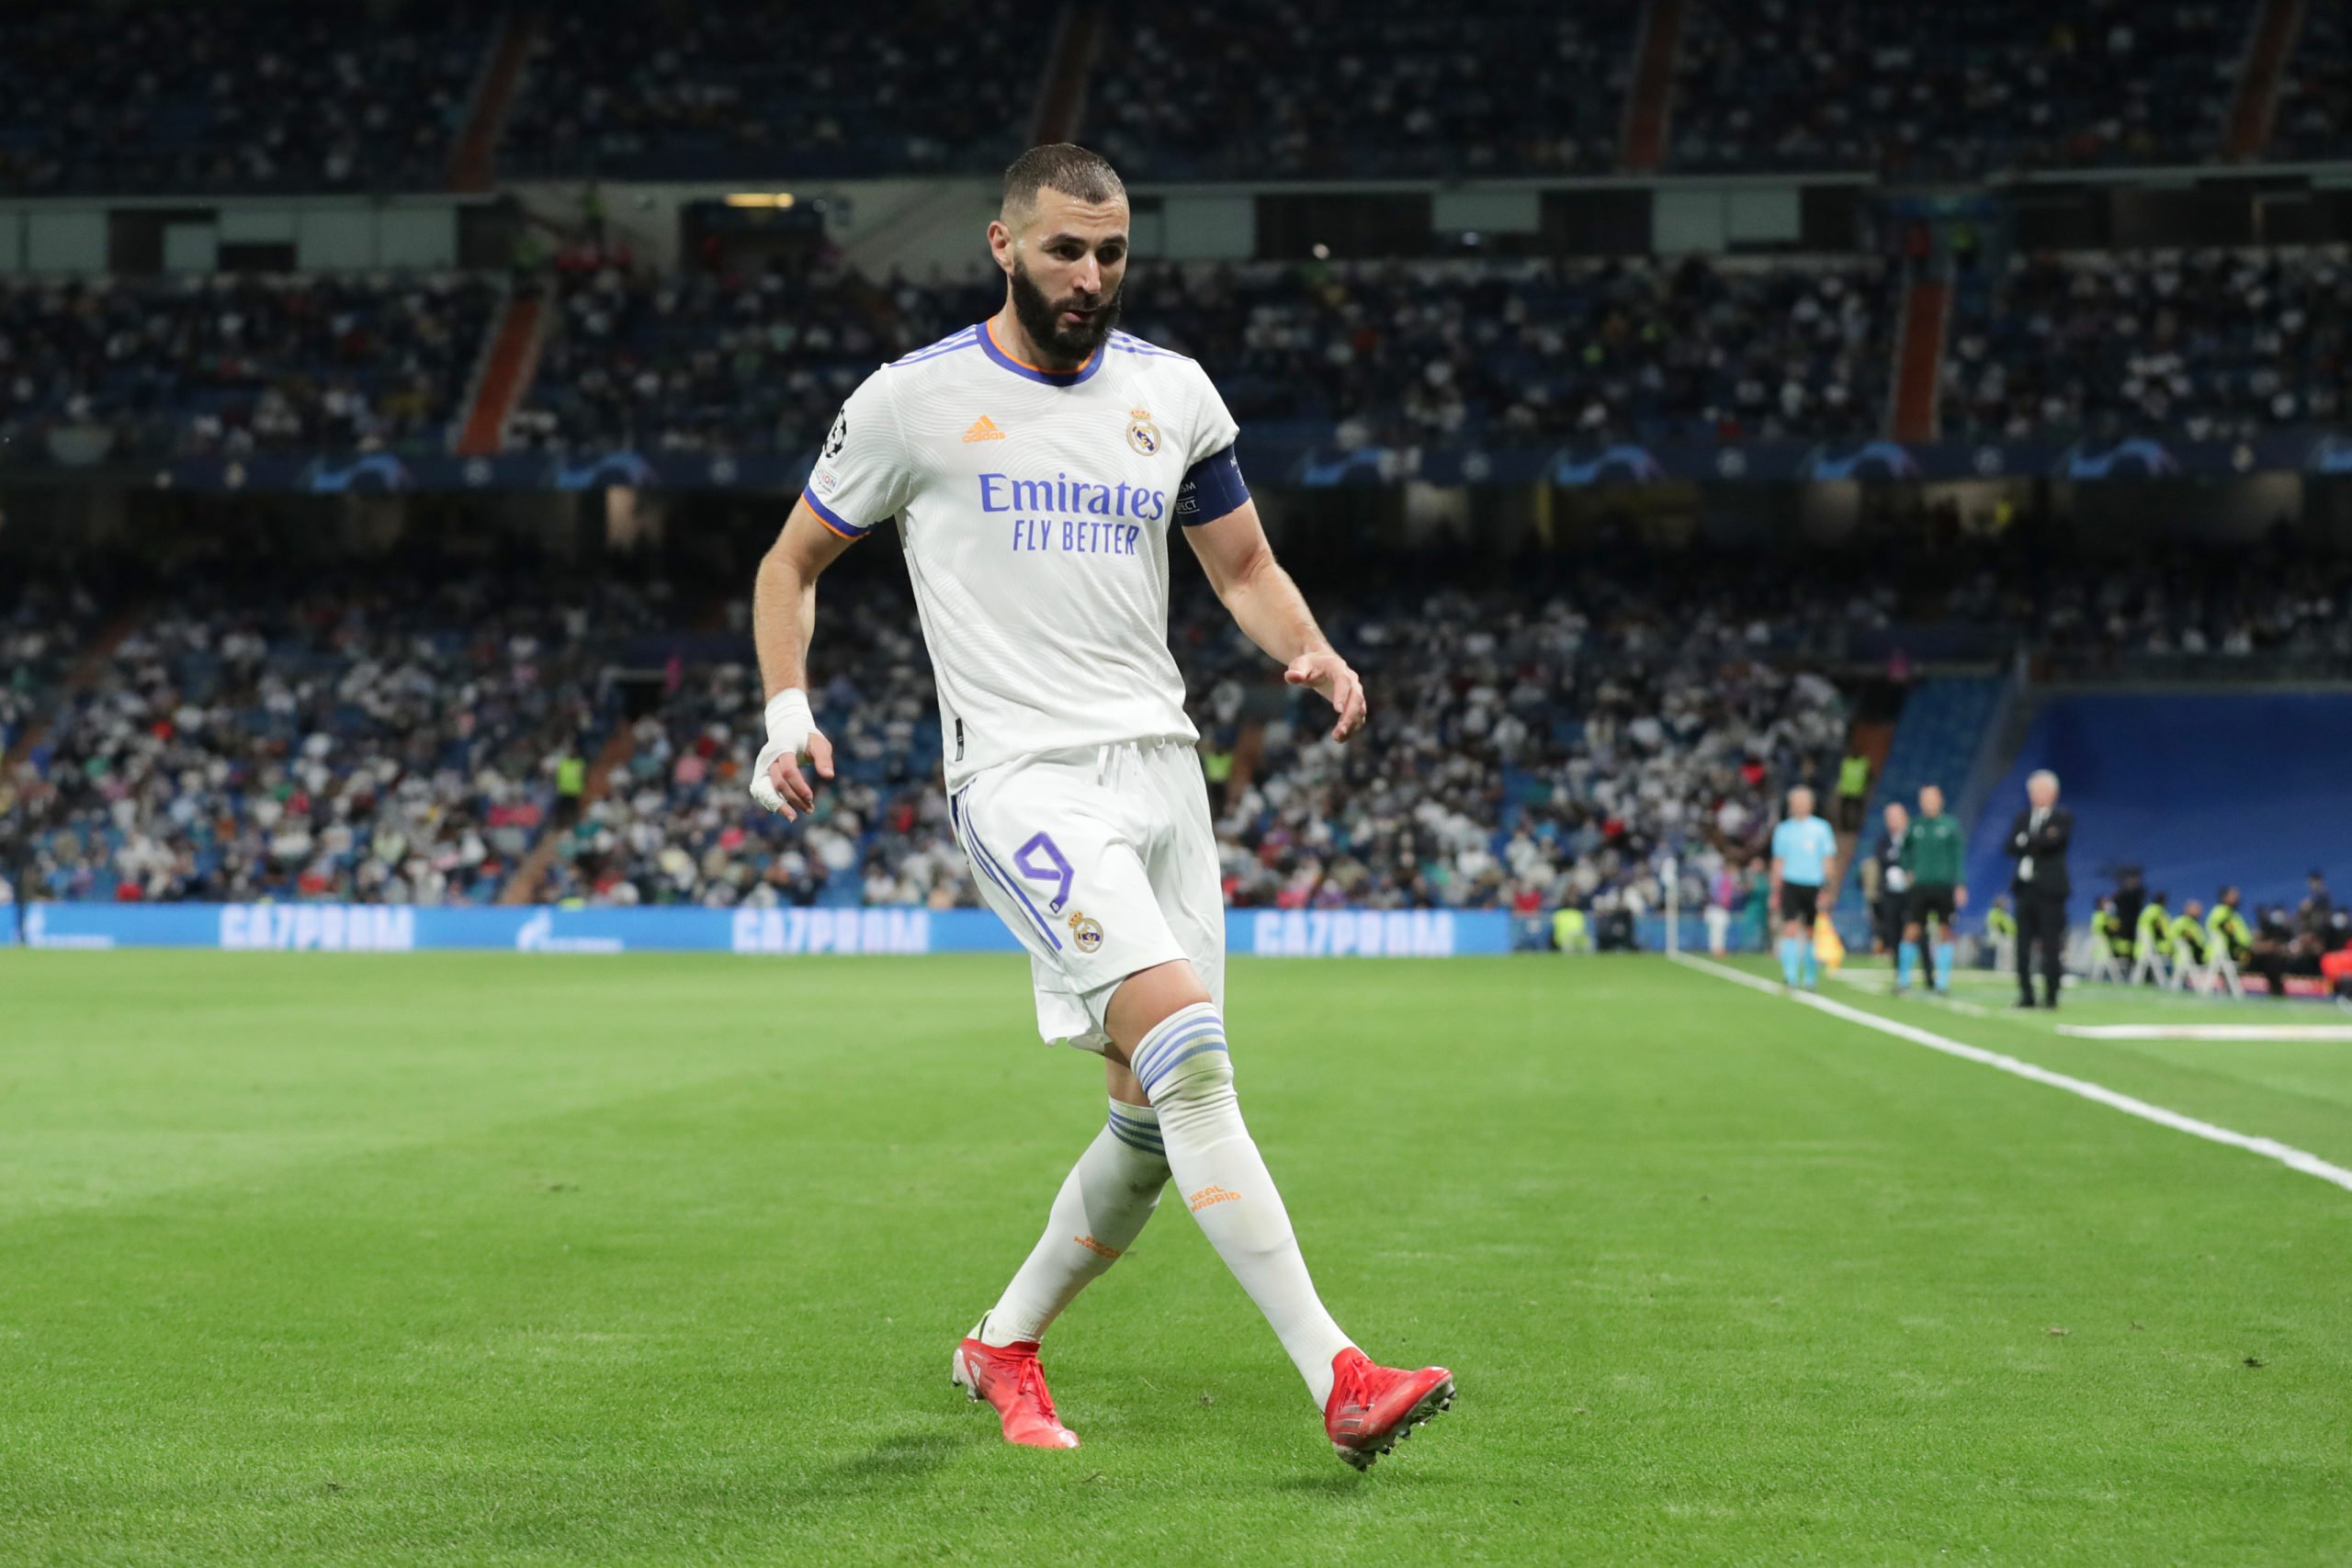 MADRID, SPAIN - SEPTEMBER 28: Karim Benzema of Real Madrid CF in action during the UEFA Champions League group D match between Real Madrid and FC Sheriff at Estadio Santiago Bernabeu on September 28, 2021 in Madrid, Spain. (Photo by Gonzalo Arroyo Moreno/Getty Images)
The 4th Official uses images provided by the following image agency: Getty Images (https://www.gettyimages.de/) and Imago Images (https://www.imago-images.de/)